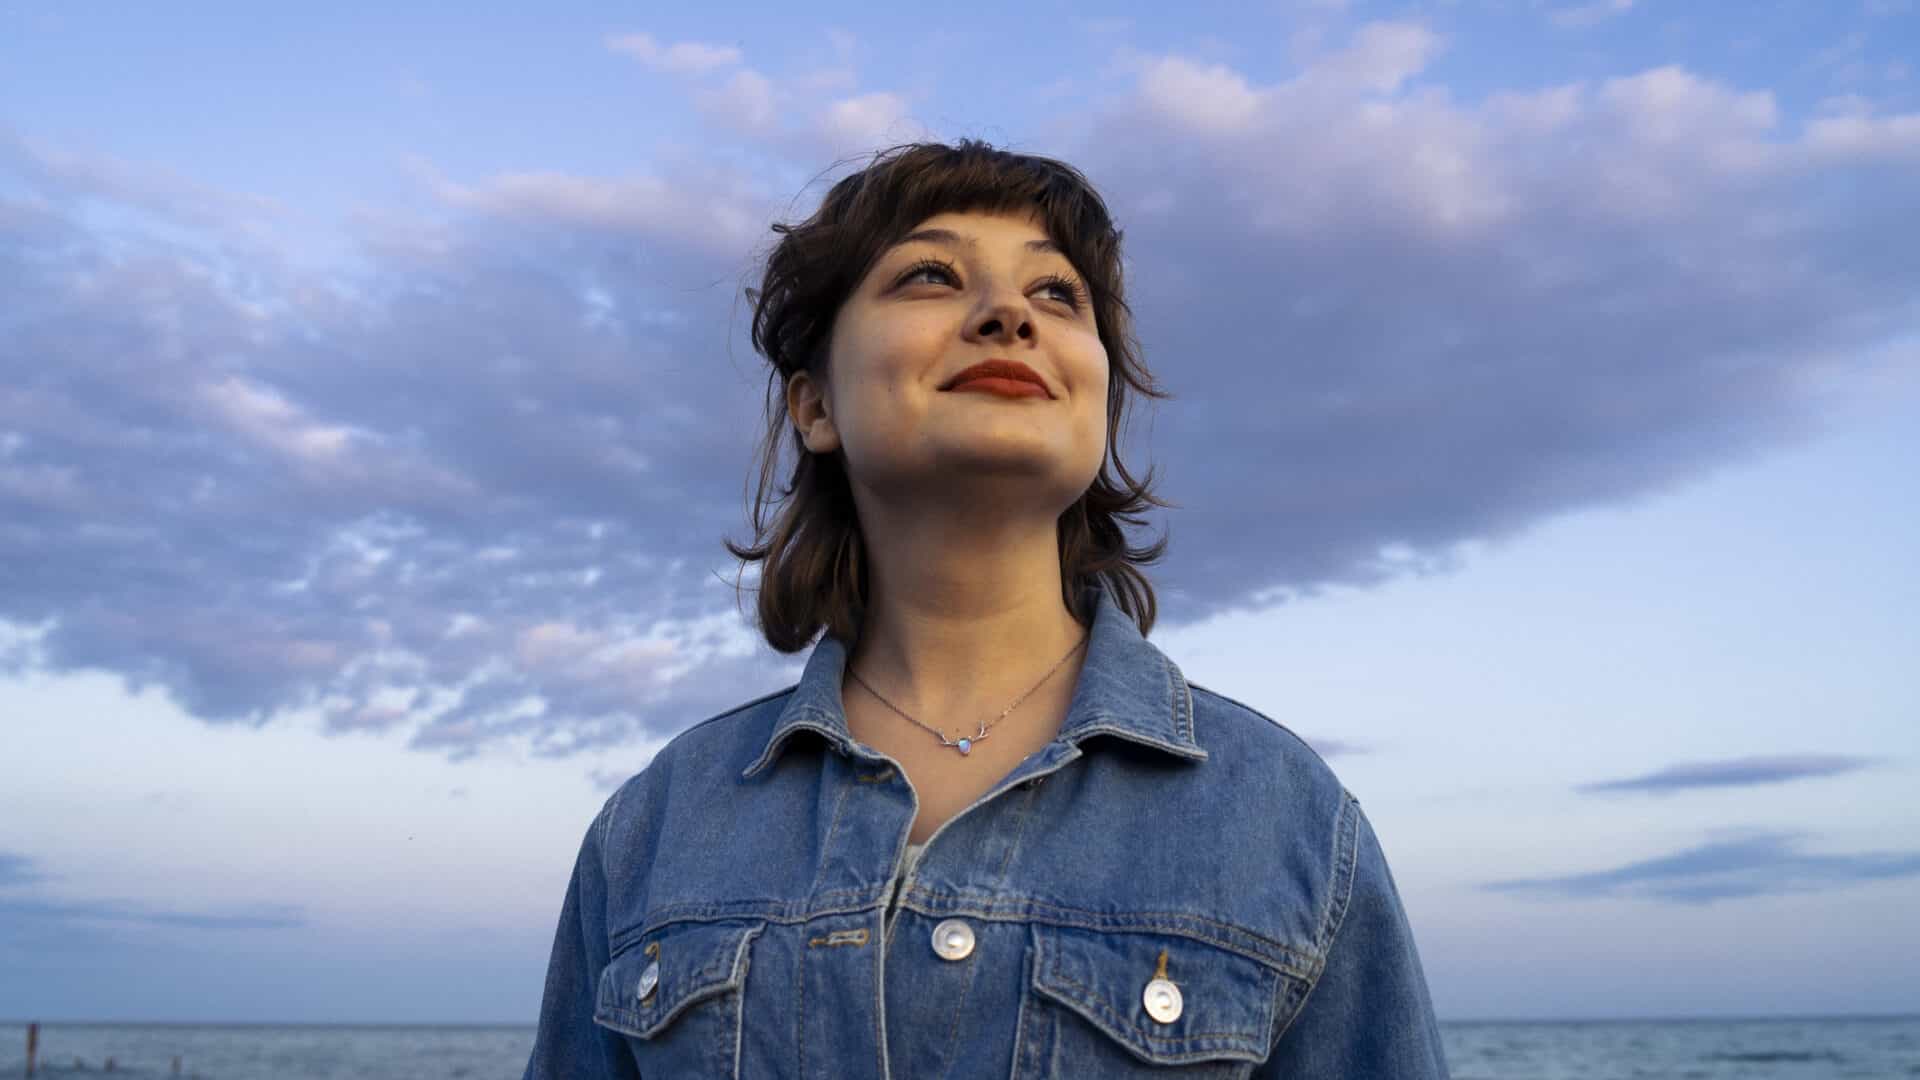 Photograph of a young woman wearing a denim jacket and smiling towards the sun, taken in the pastel colours of the sunset.